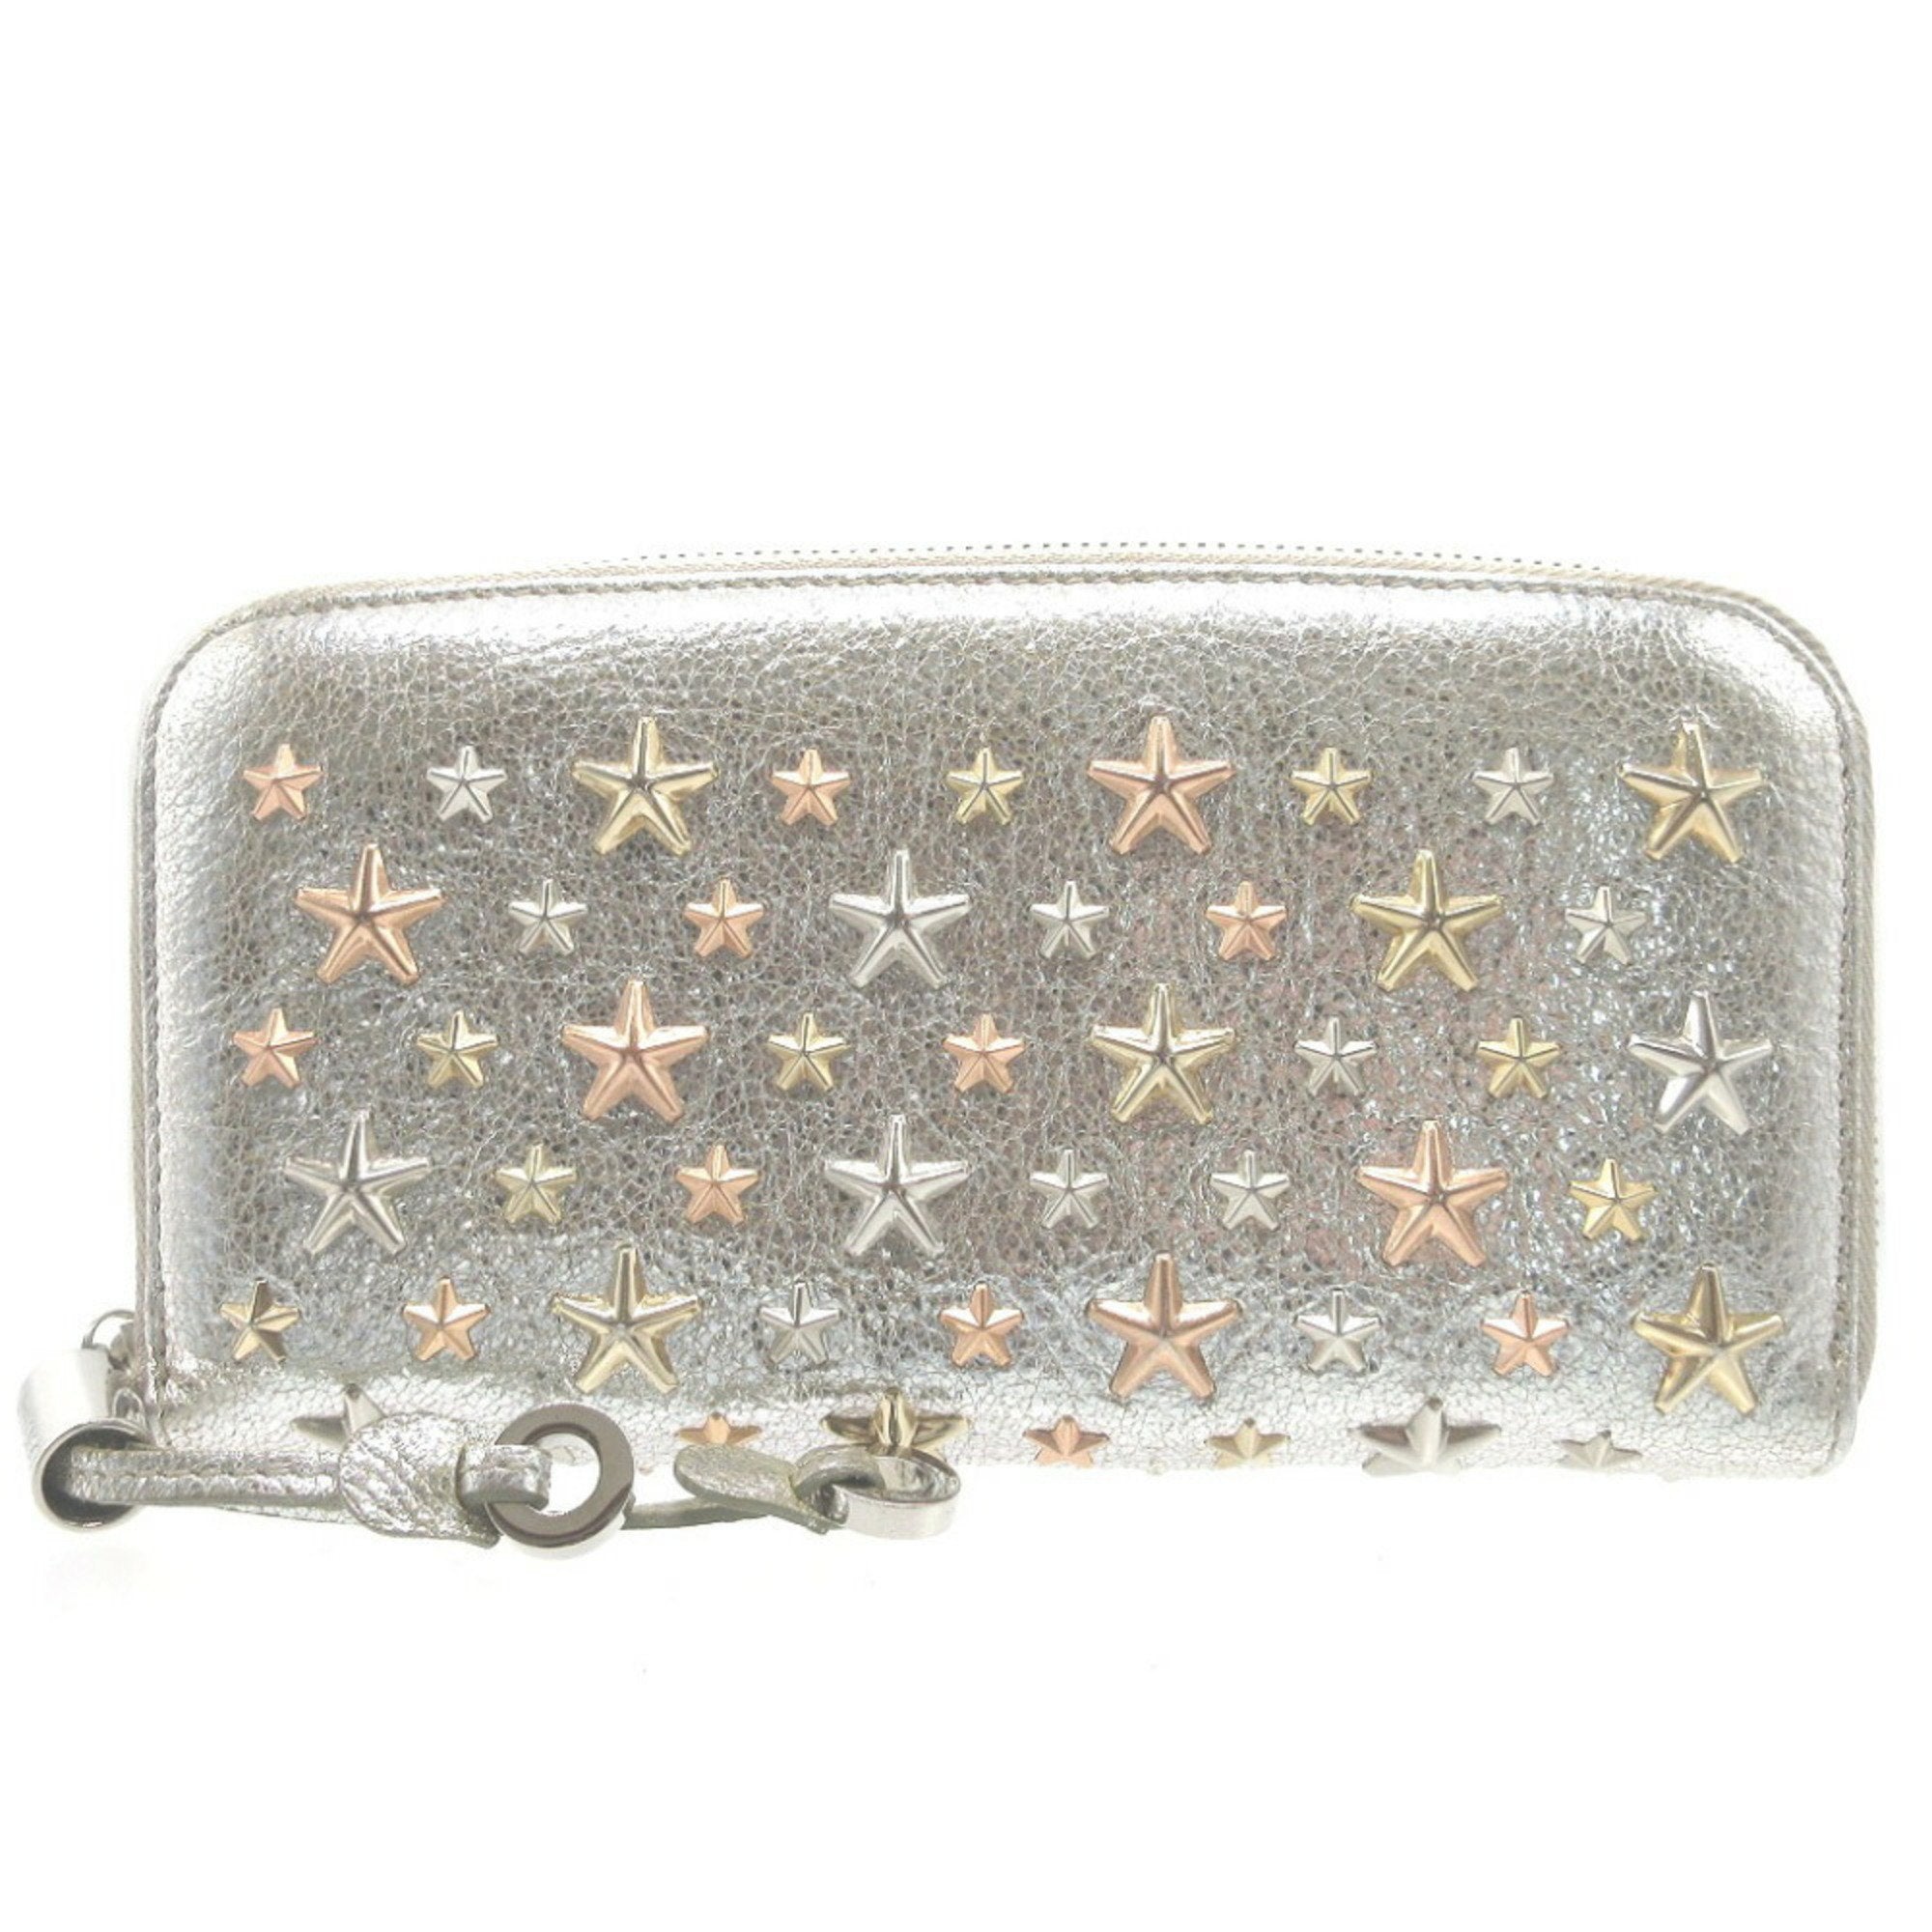 Star Stud Patent Leather Silver Round Long Wallet 0049 6C0049BB4